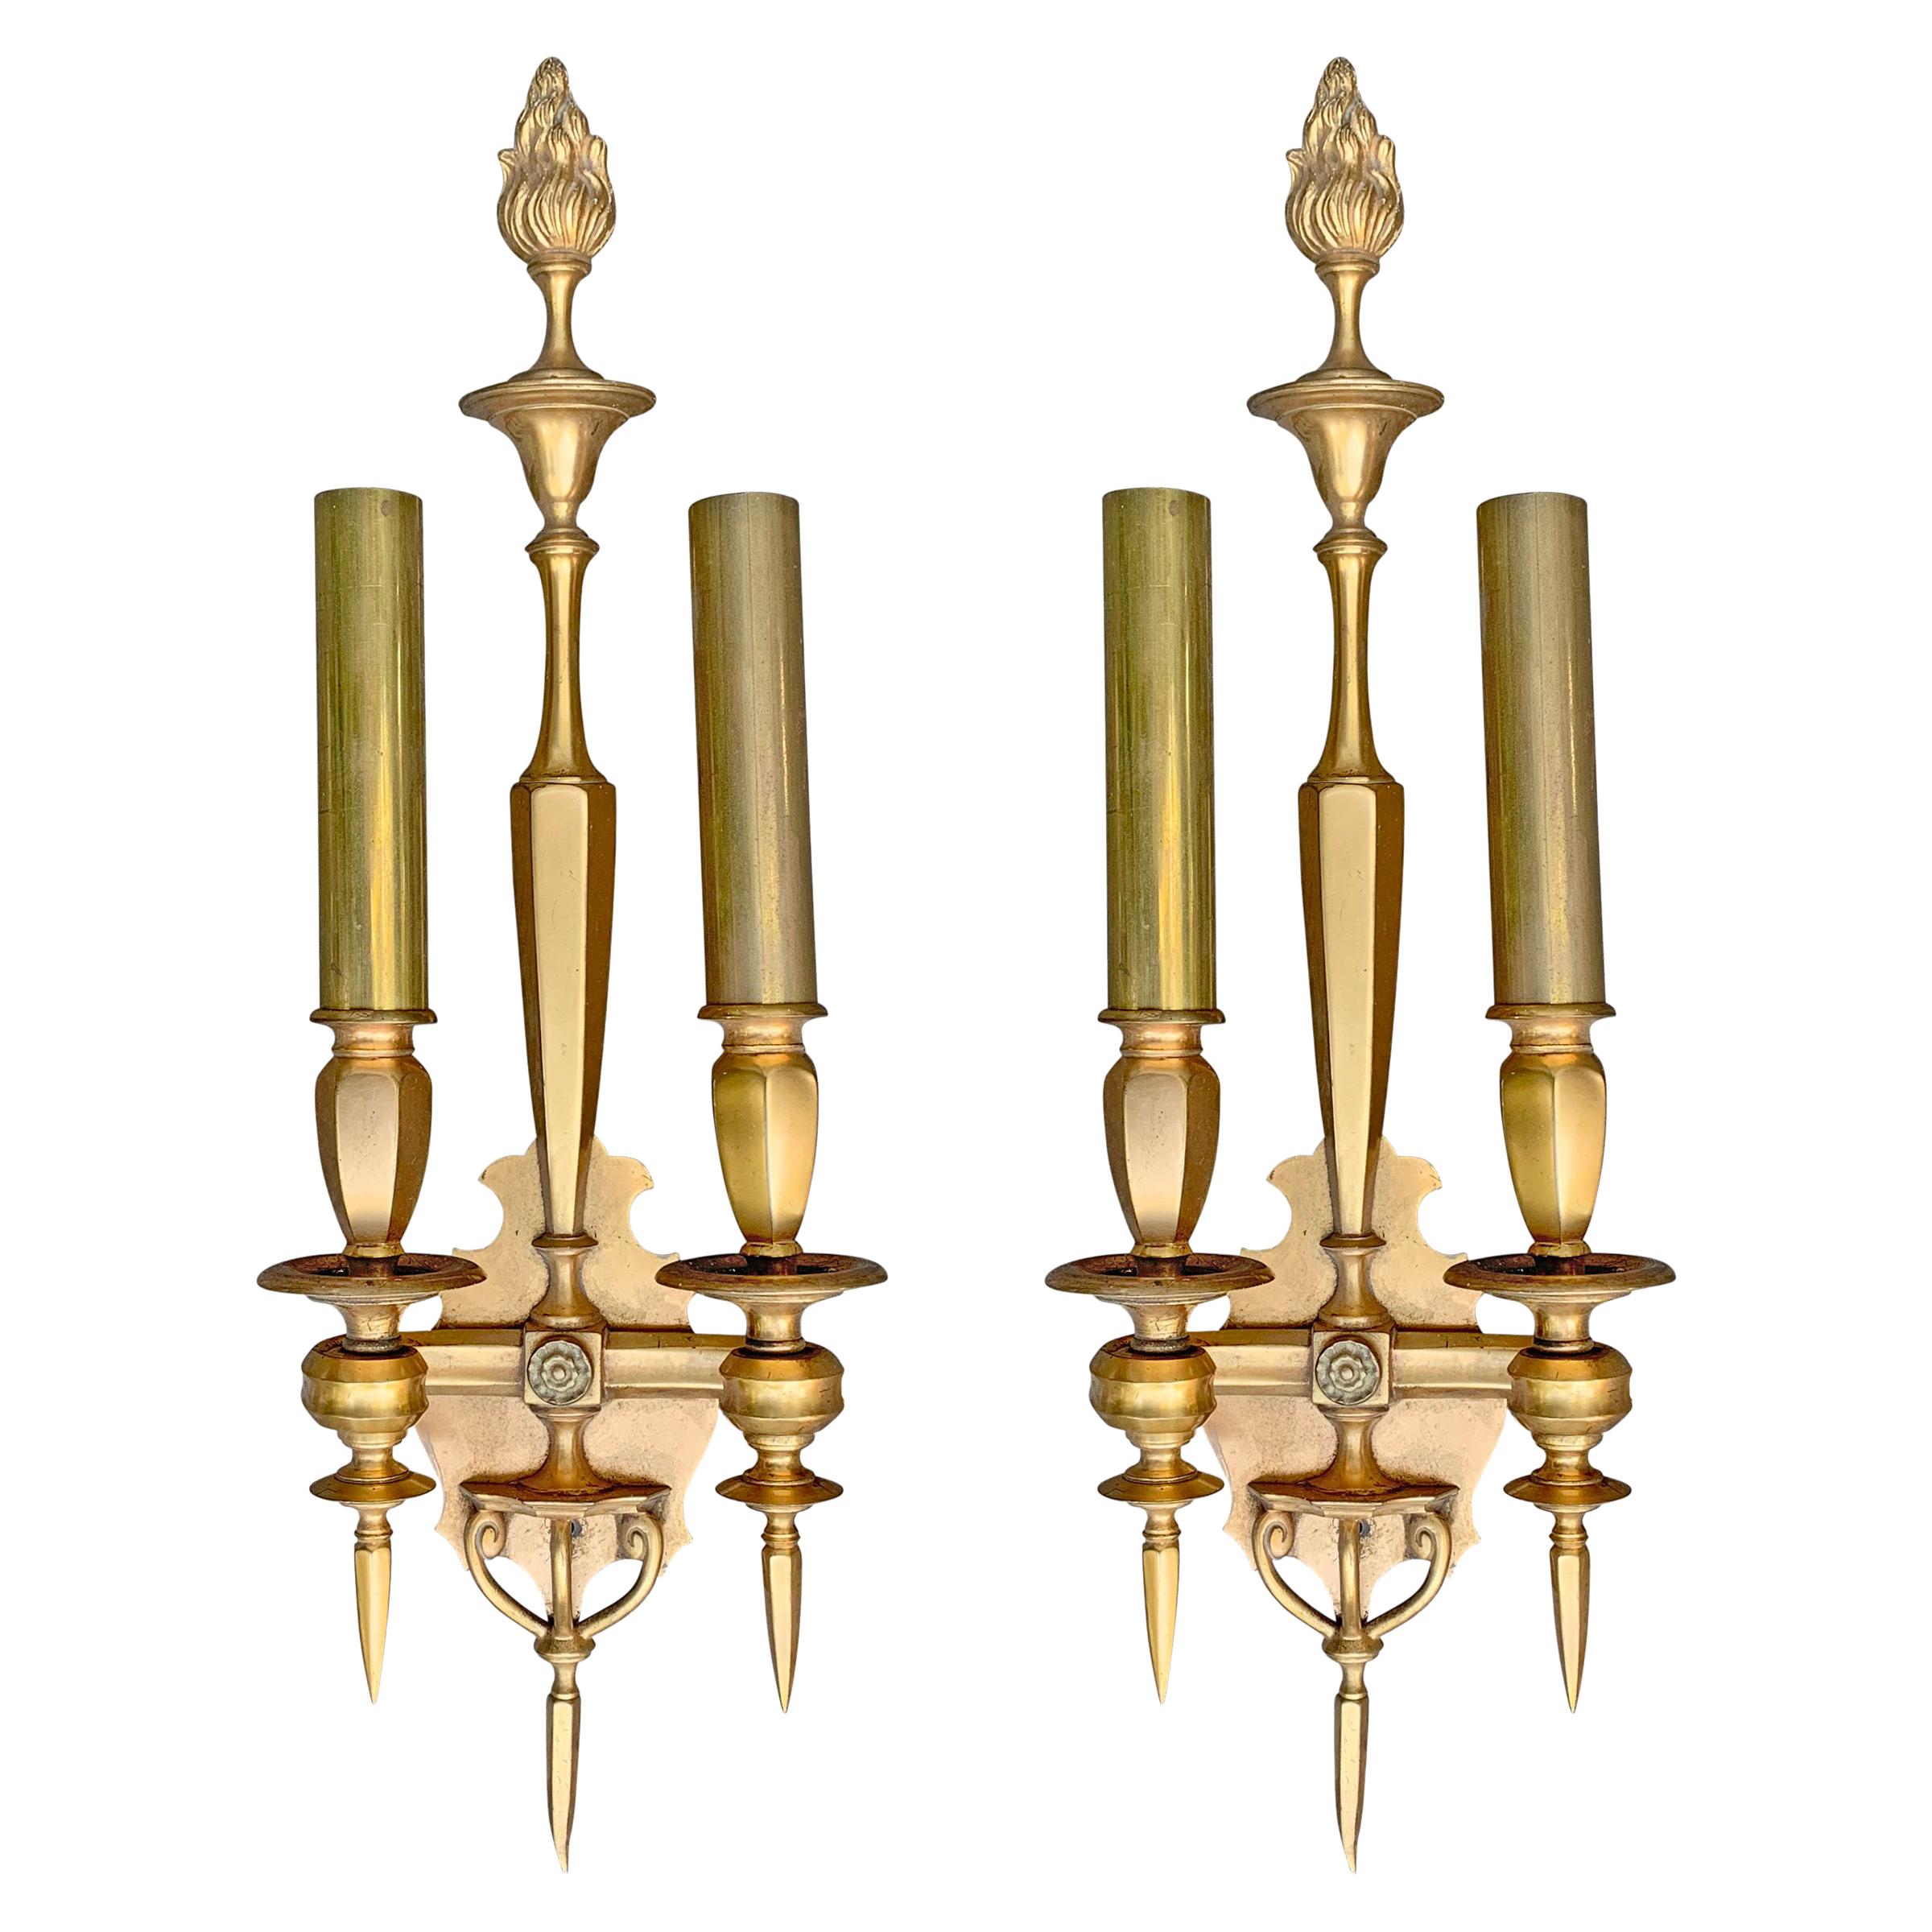 Pair of Early 20th Century Swedish Sconces